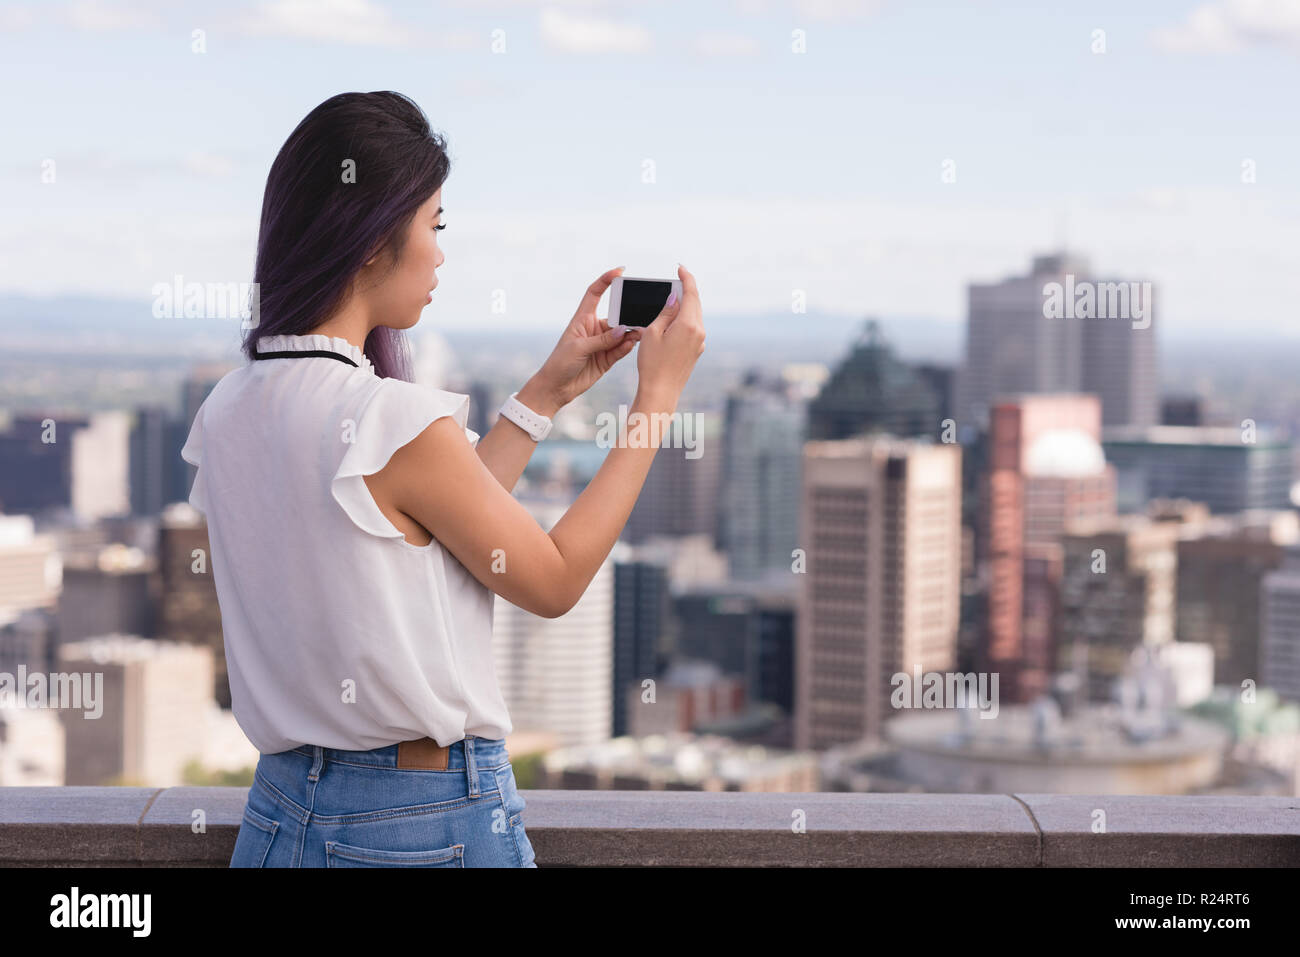 Woman clicking photo on mobile phone Stock Photo